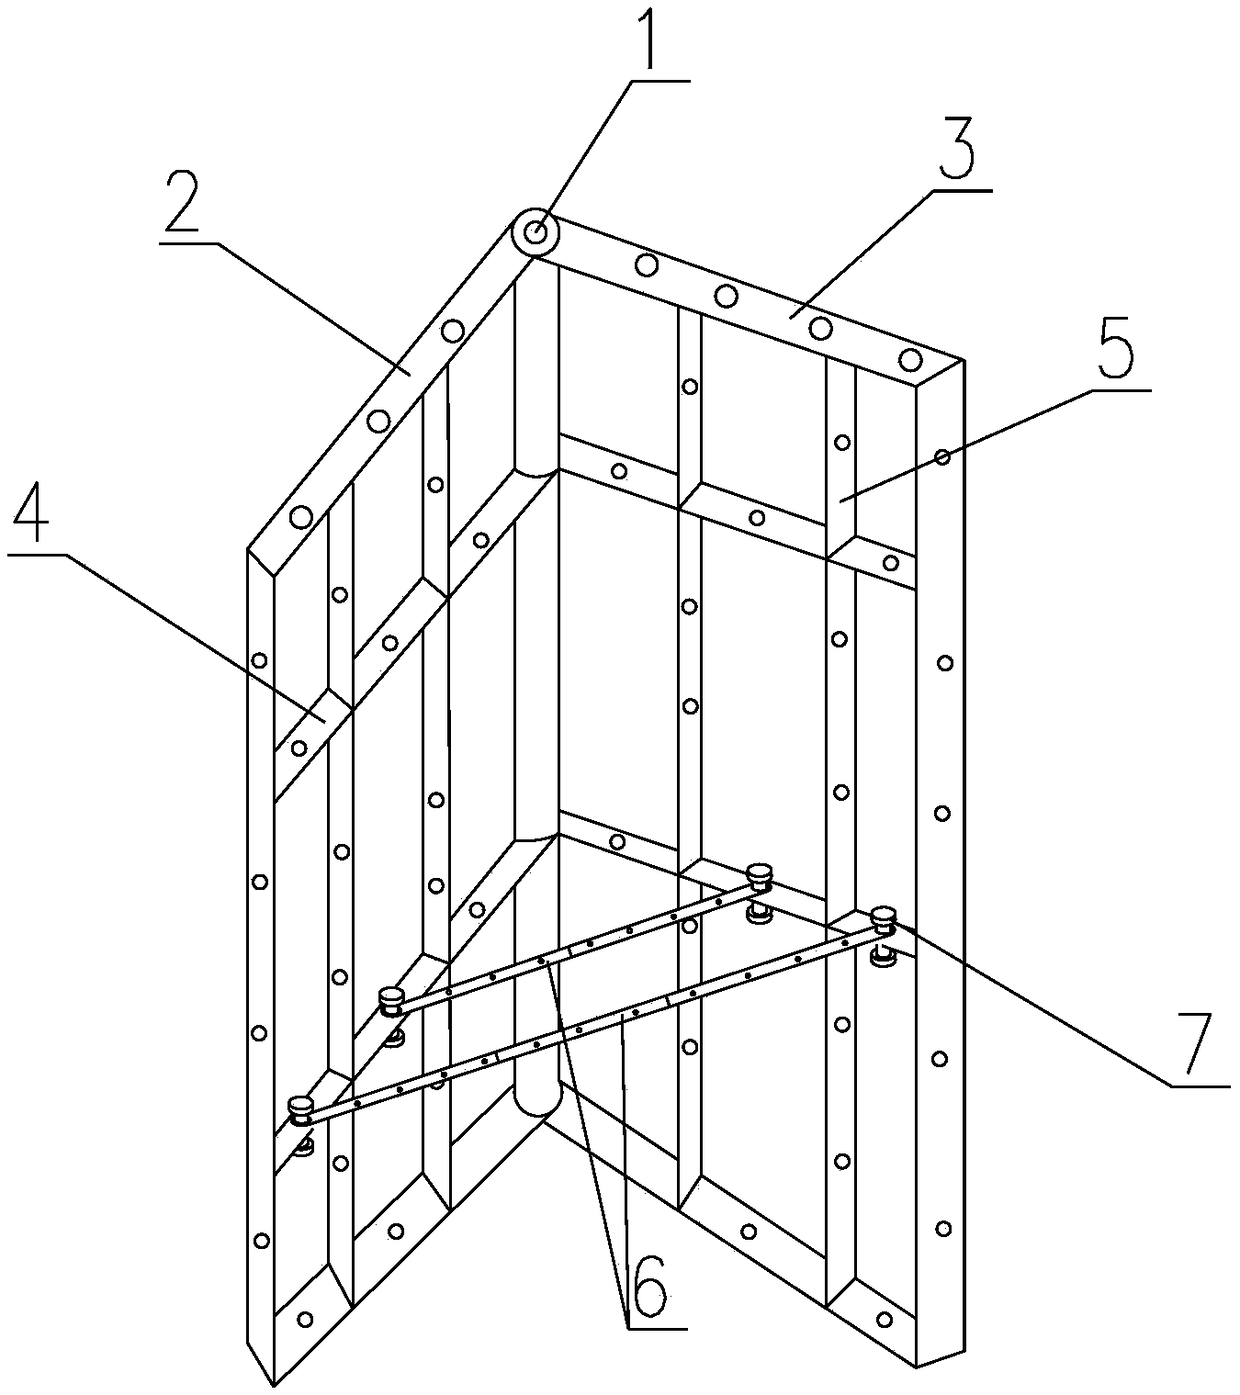 Connecting mould plate for inside corner and outside corner and with adjustable angle